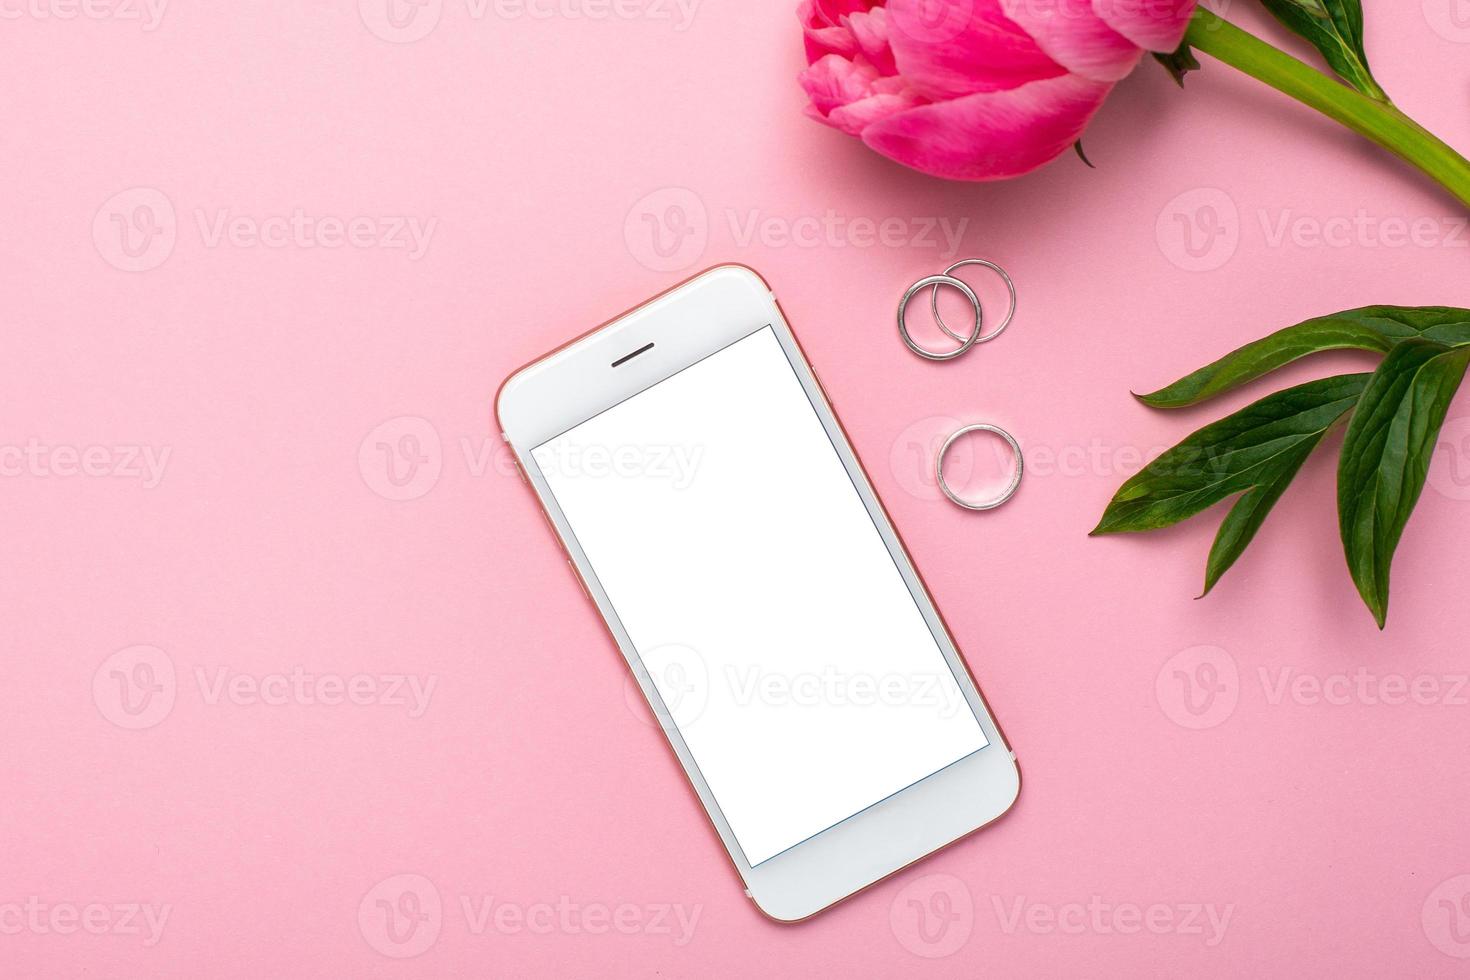 Mobile phone mock up and peony flower on pink pastel table in flat lay style. Woman working desk.Summer colour photo